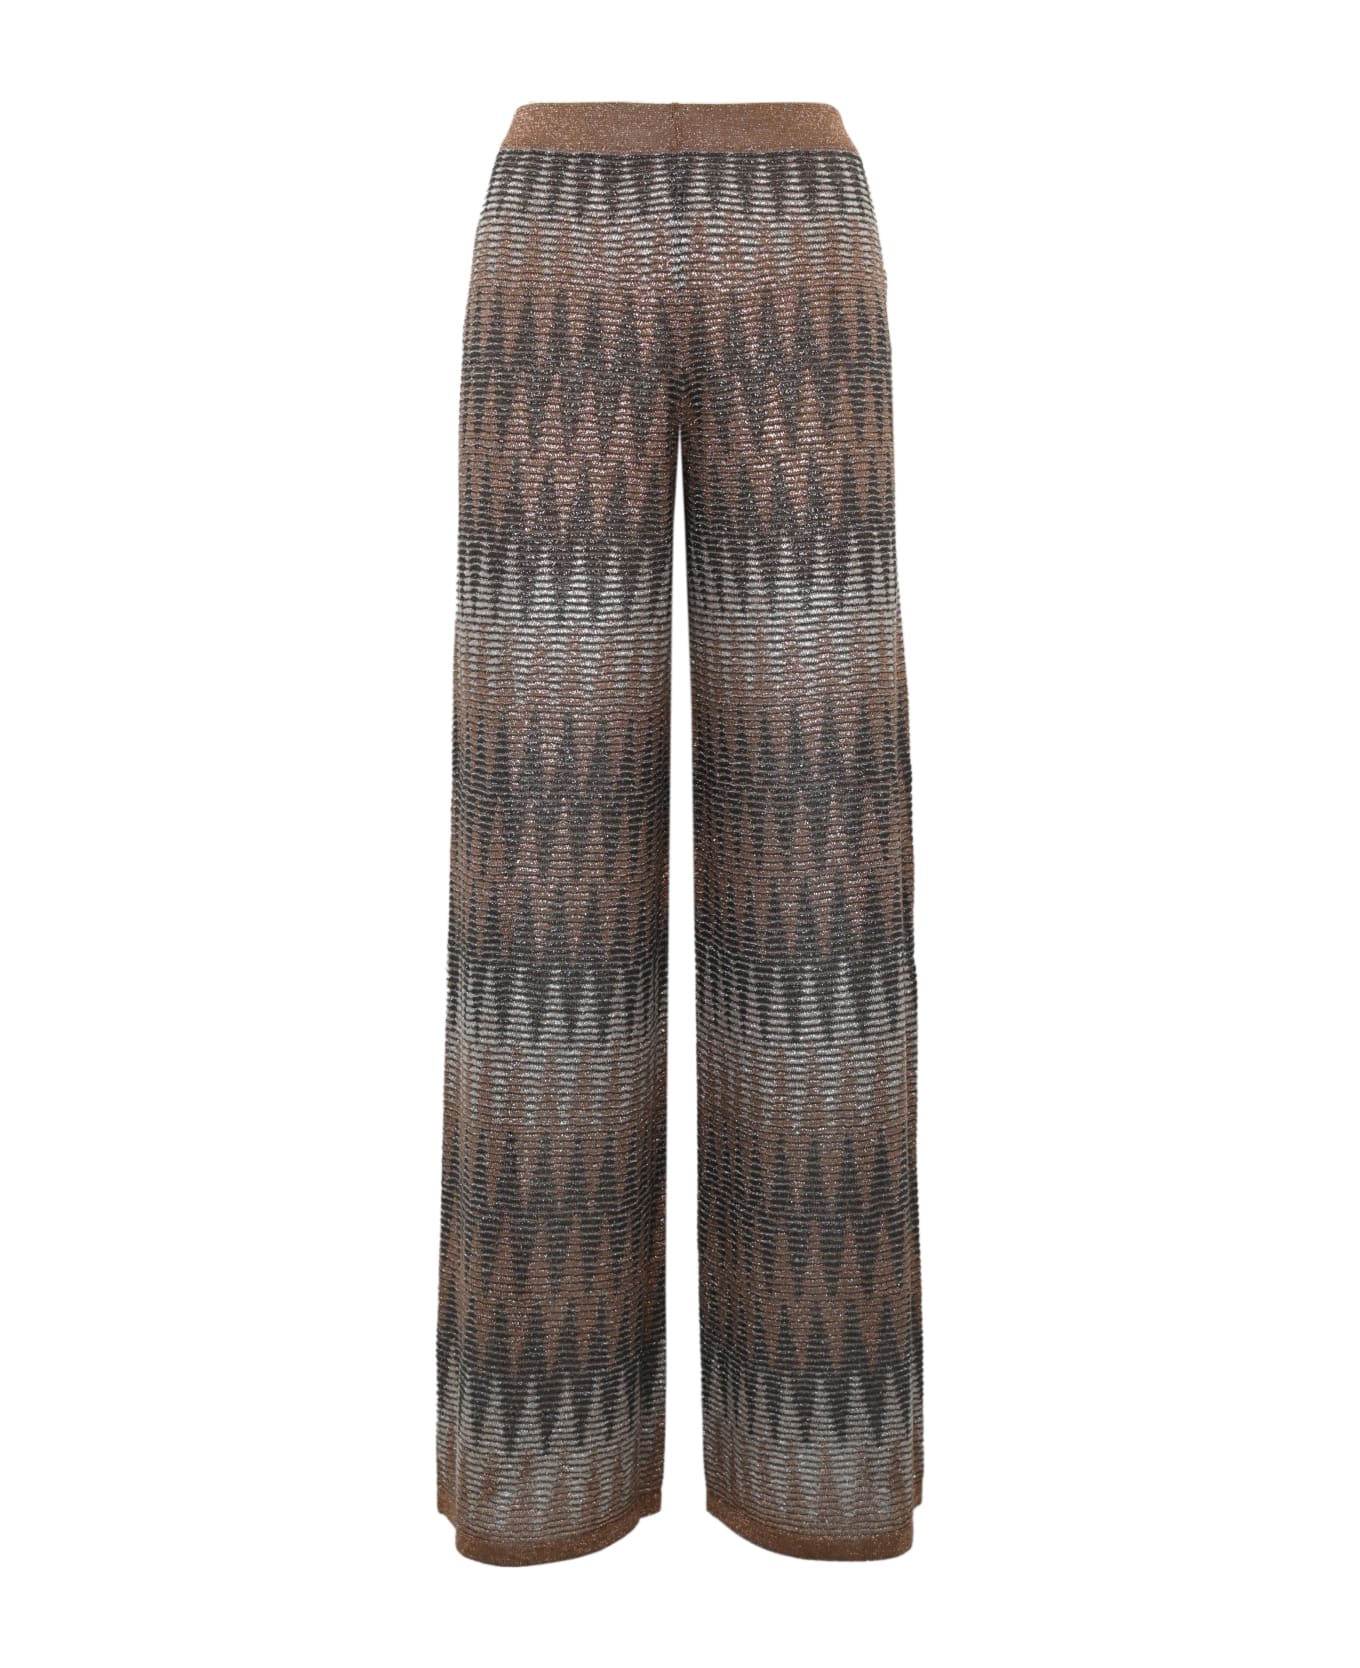 D.Exterior Patterned Viscose Trousers - Phard ボトムス